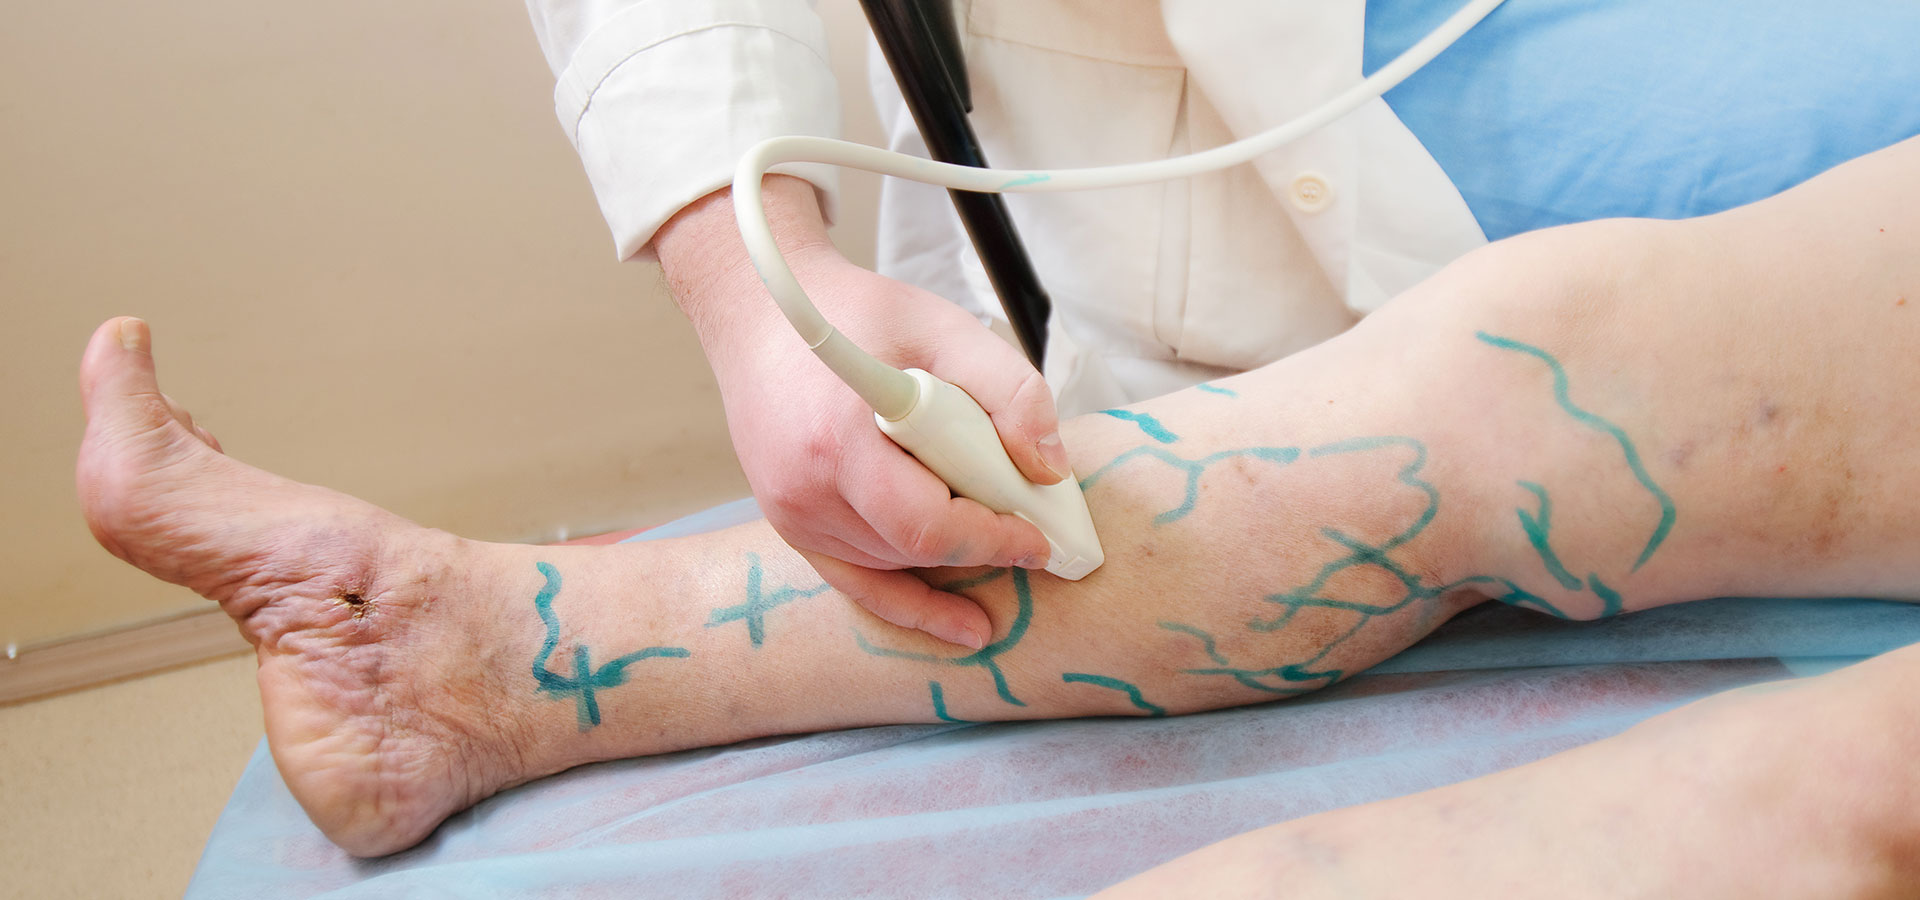 Can Varicose Veins Cause Skin Discoloration?: Center for Varicose